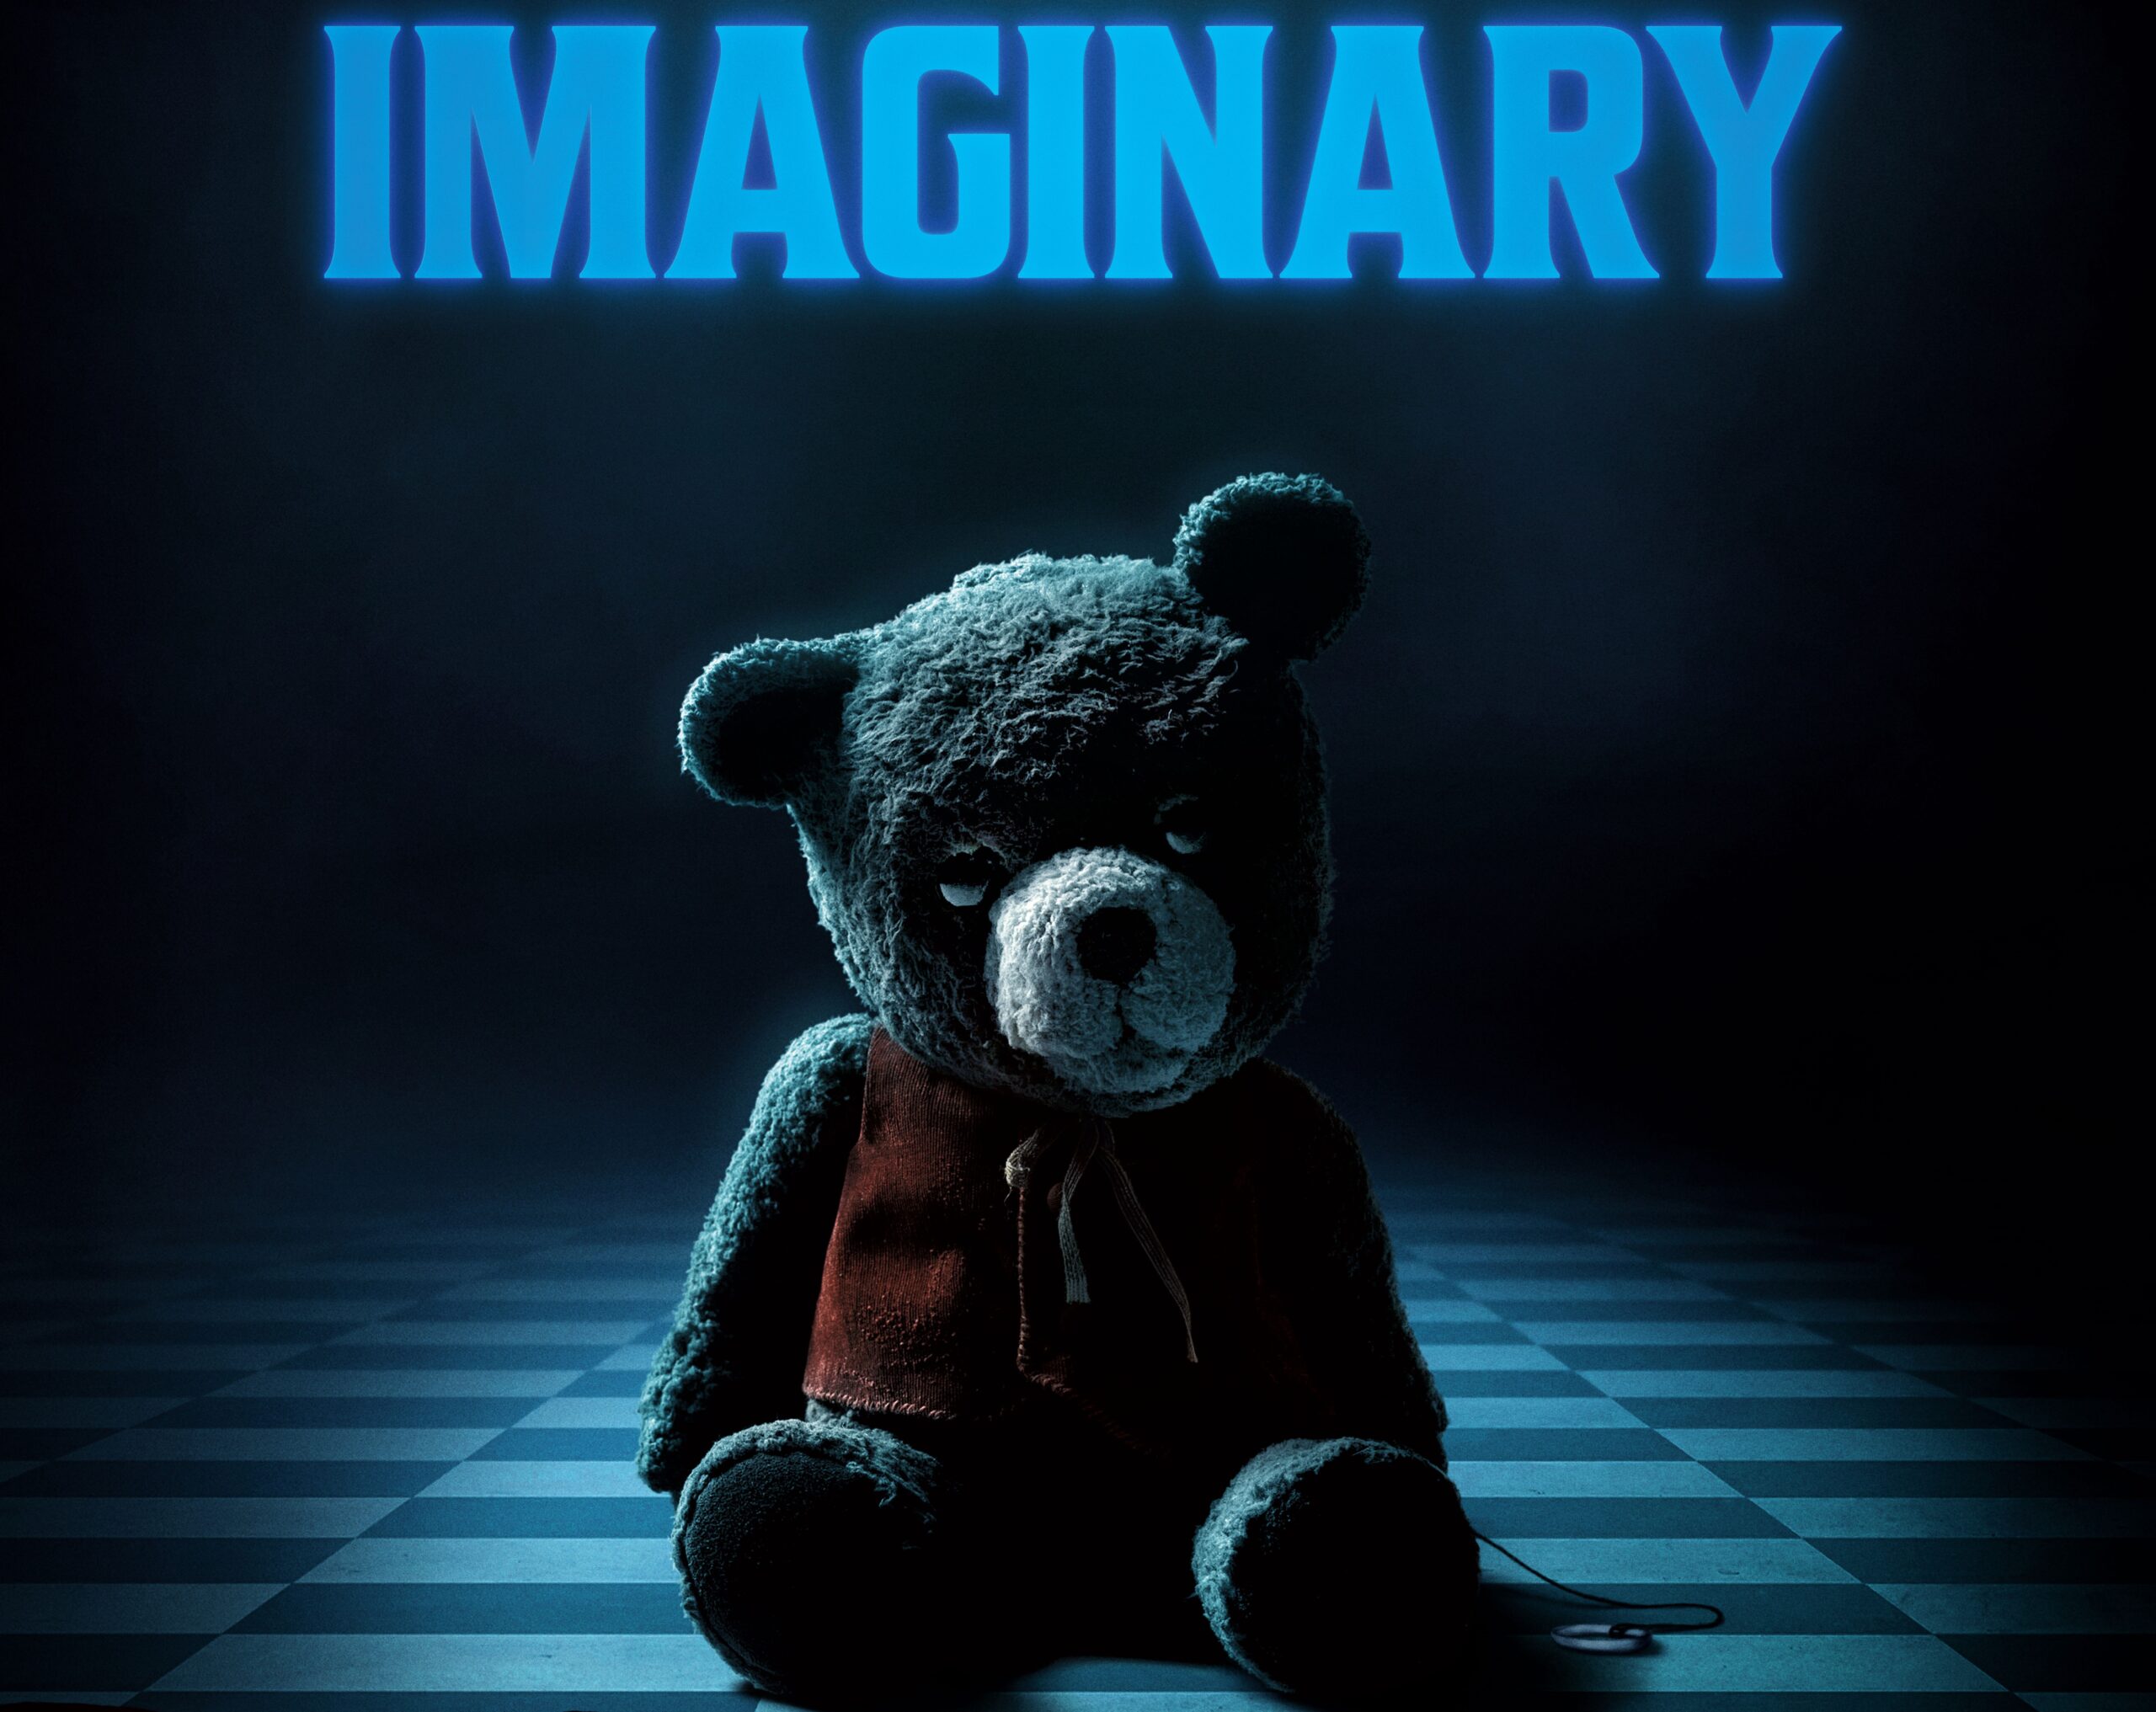 Poster Imaginary